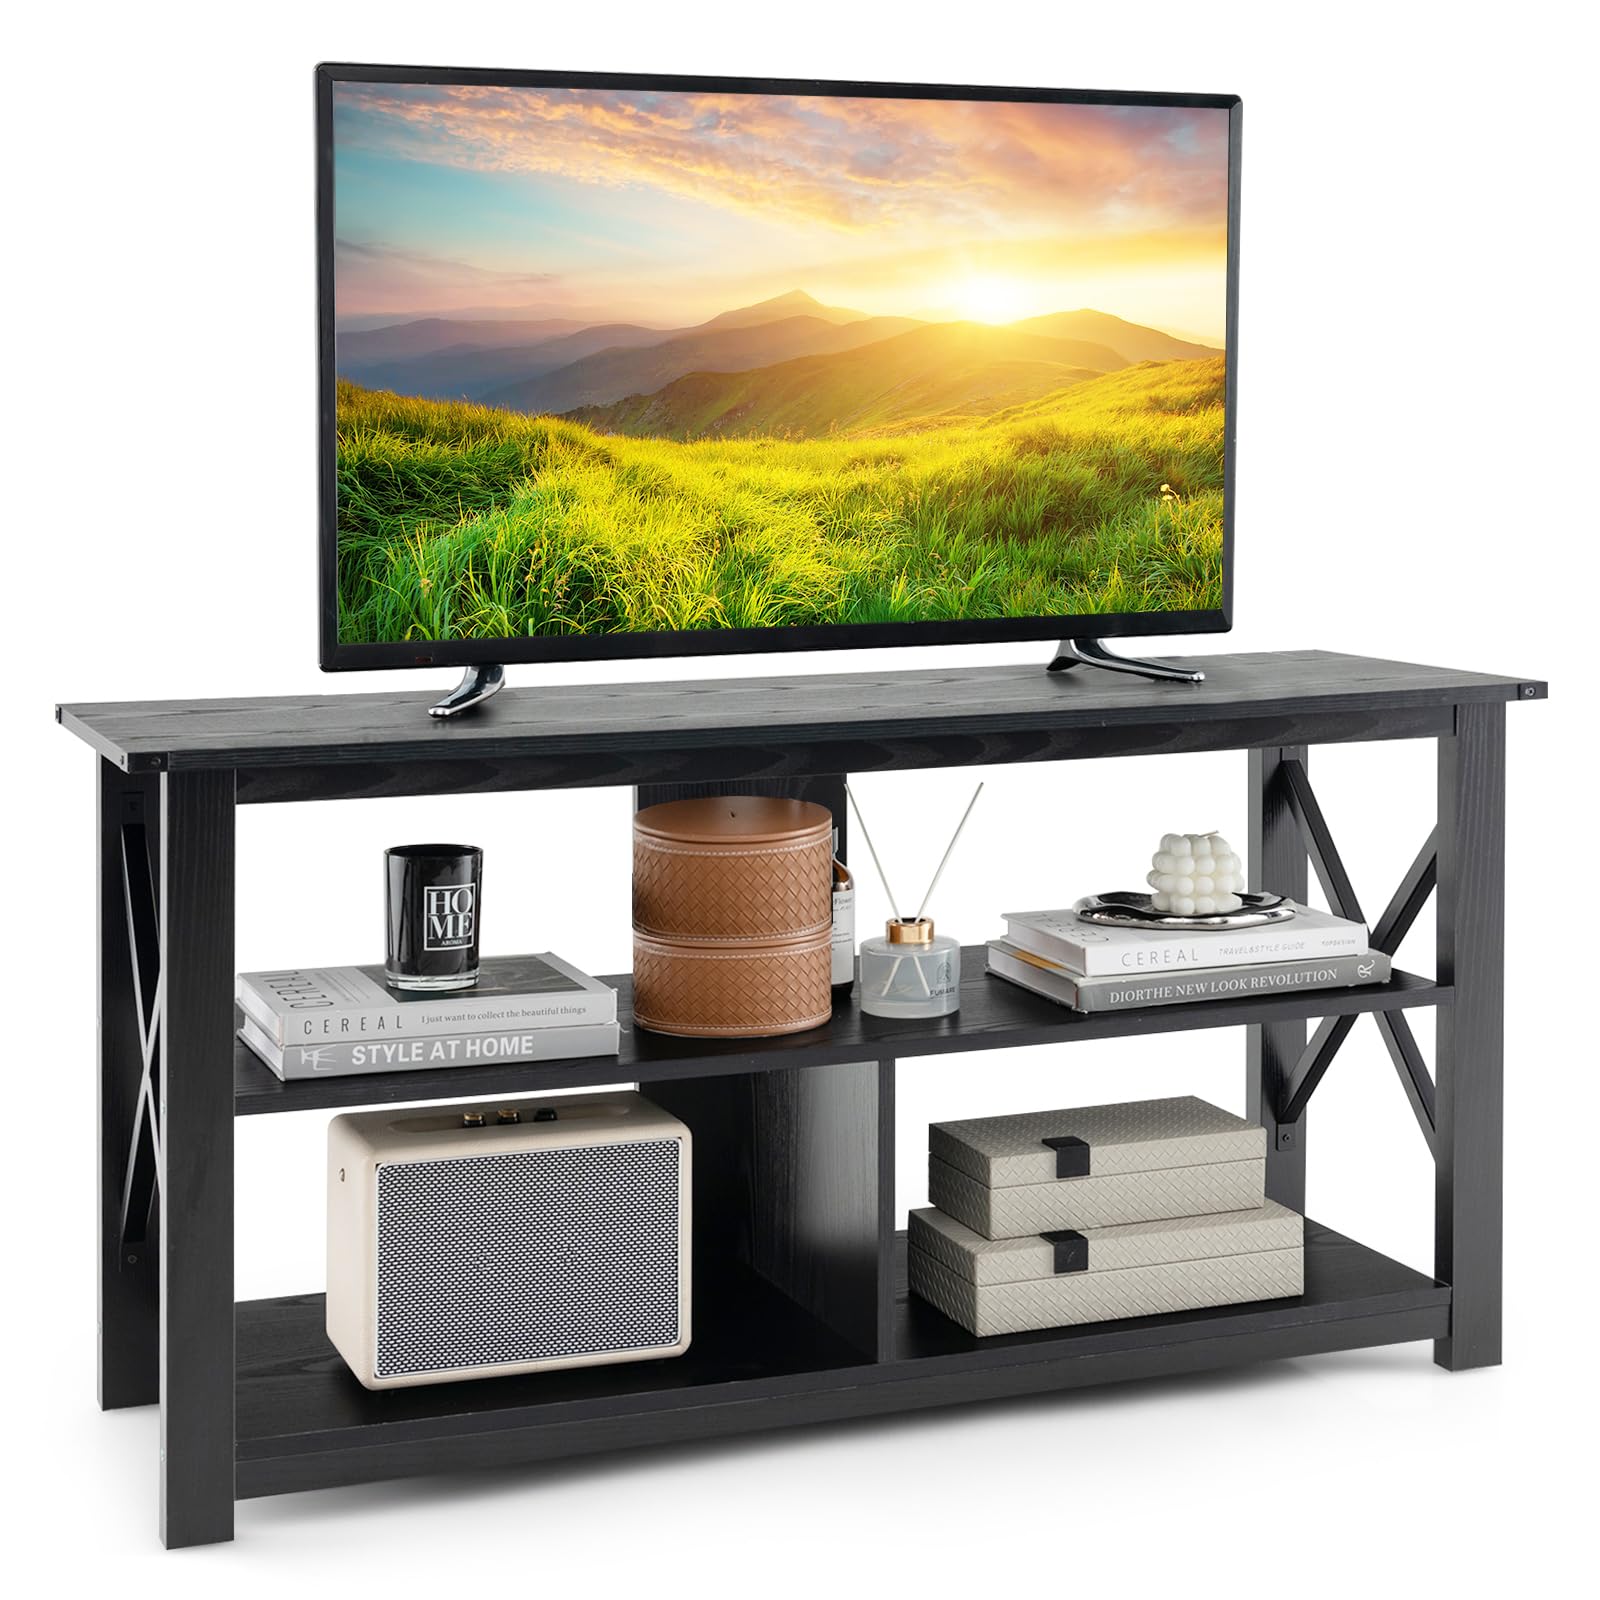 Giantex TV Stand for Bedroom, TV Cabinet for TV Up to 55"